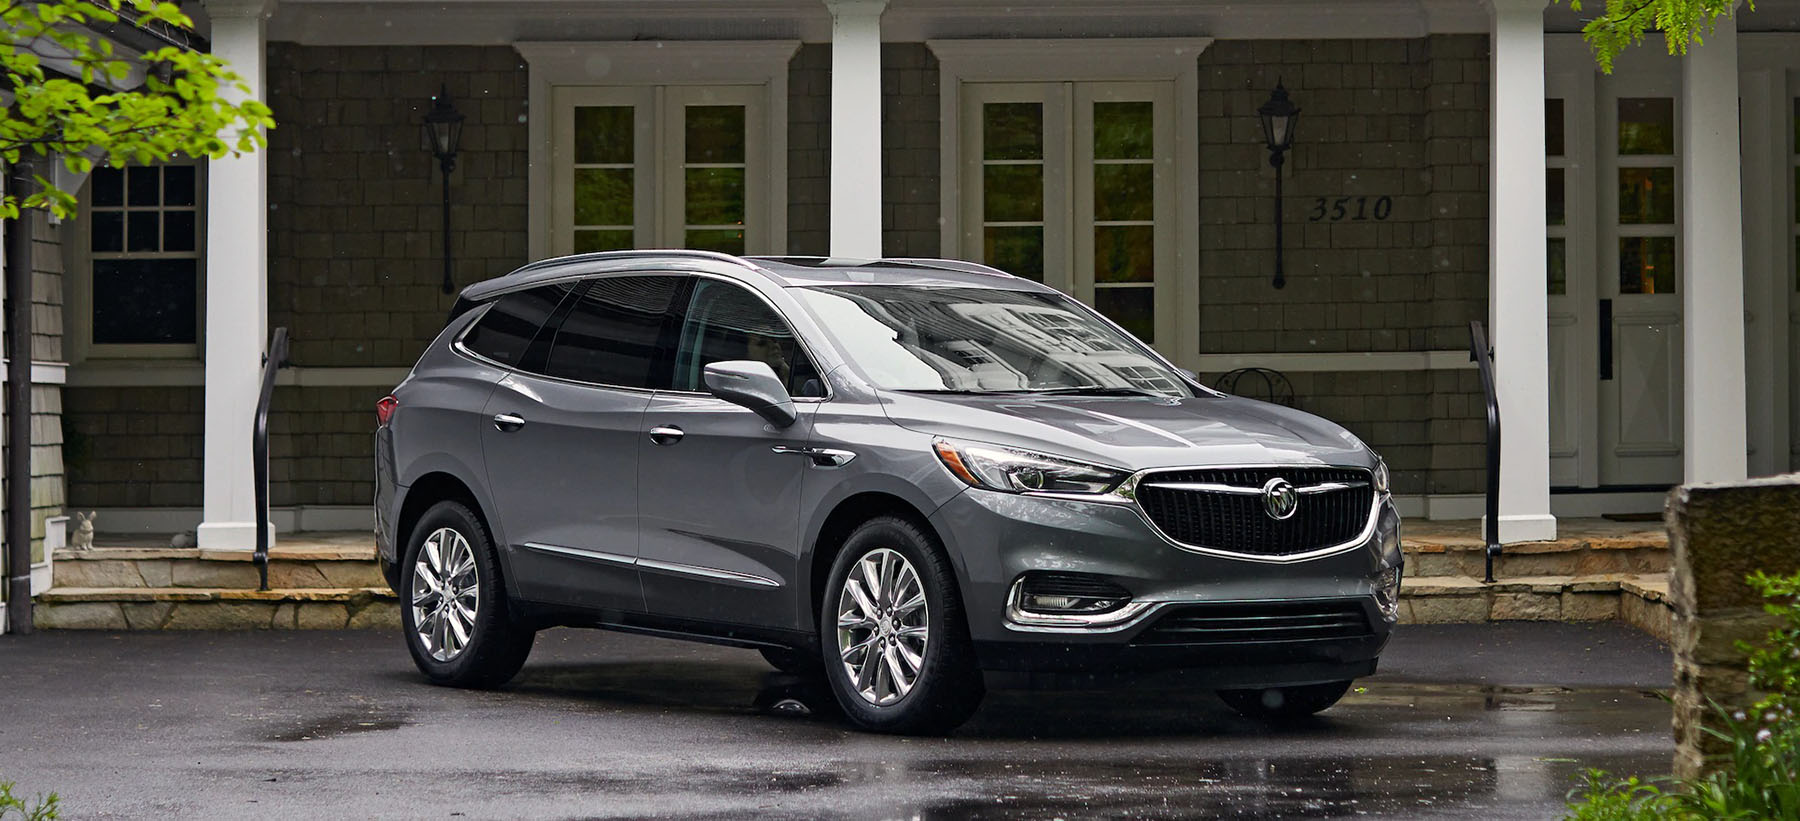 2020 Buick Enclave Appearance Main Img